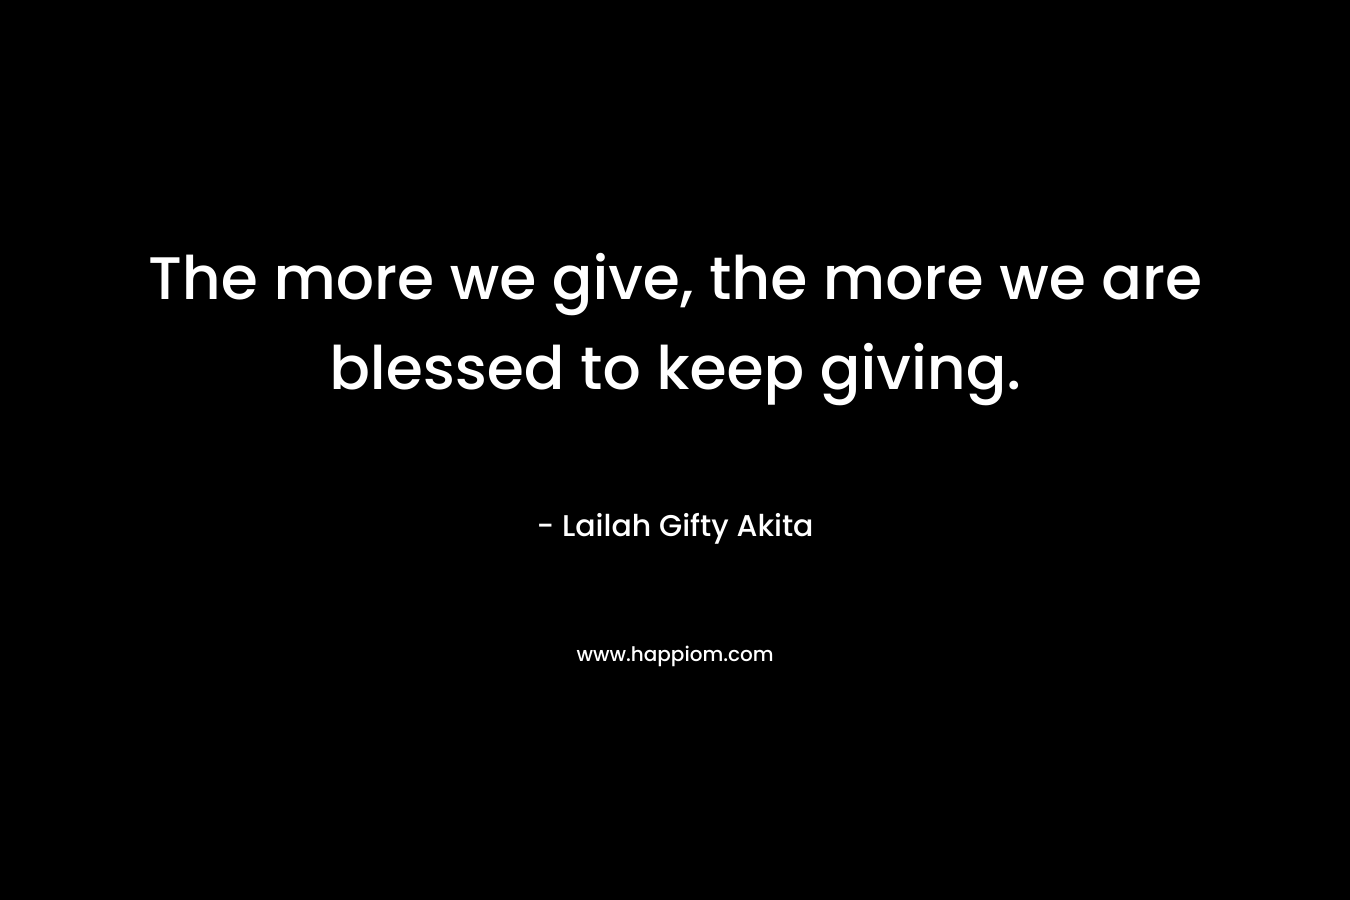 The more we give, the more we are blessed to keep giving.